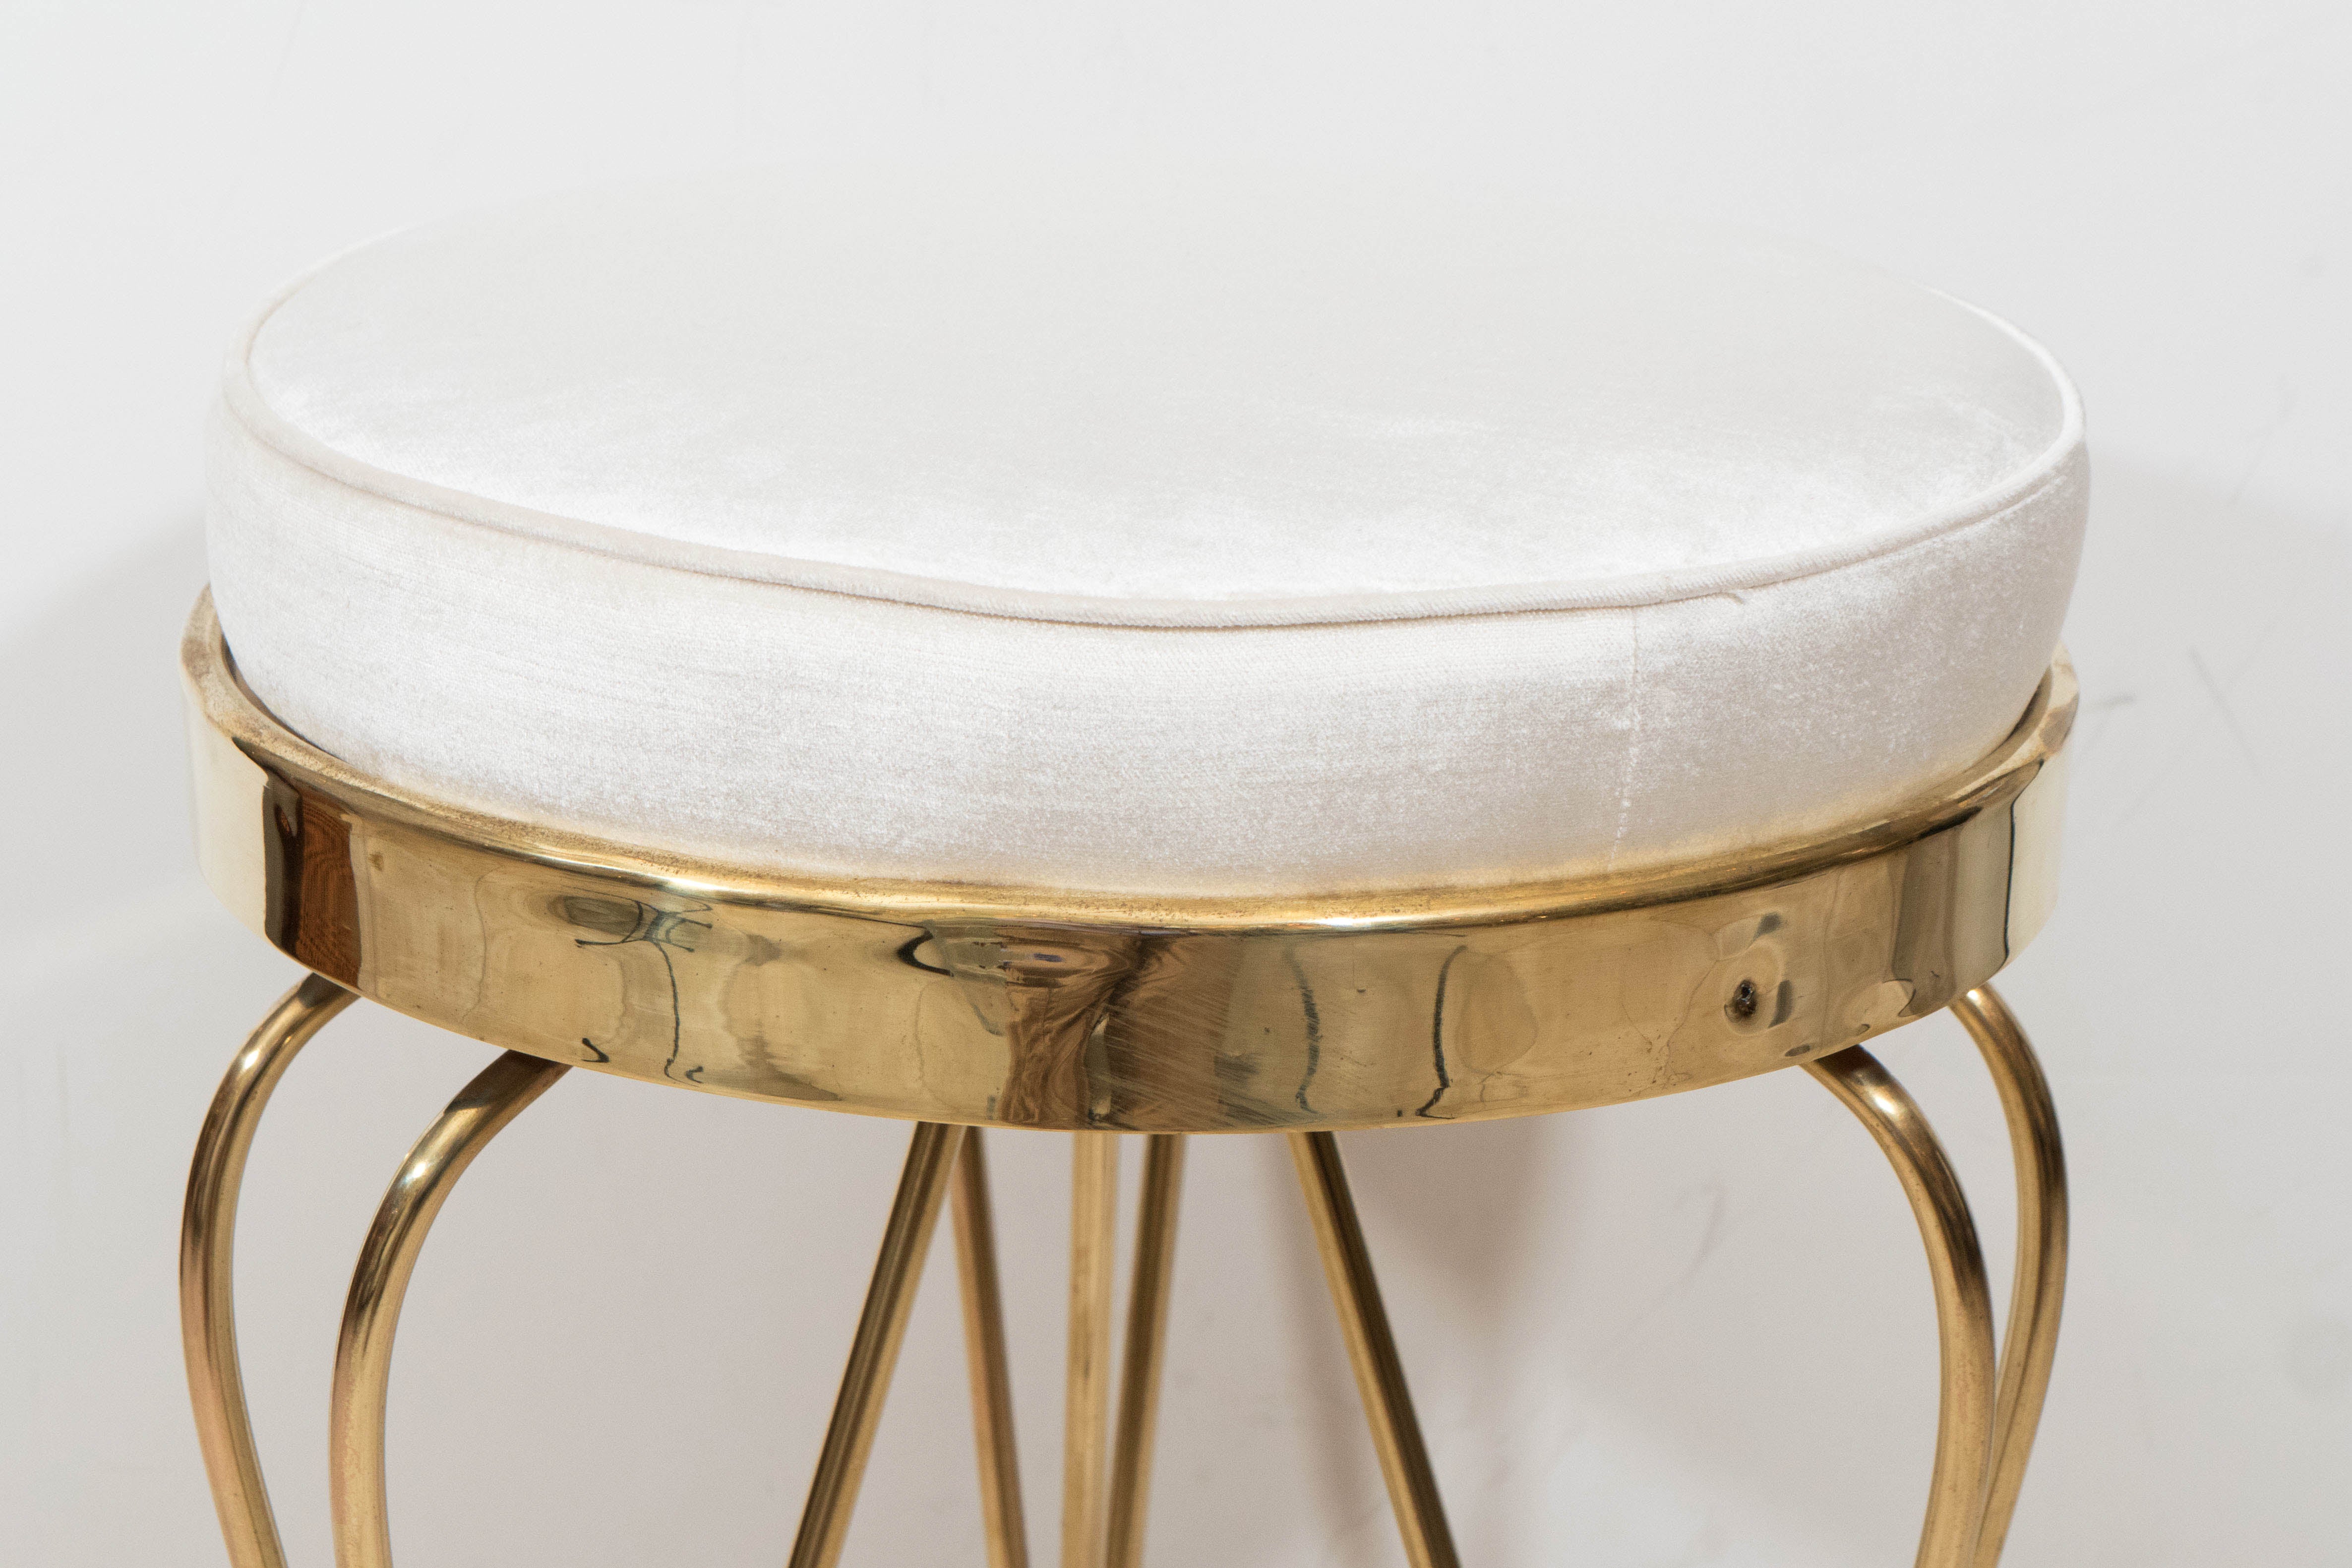 Pair of petite round upholstered stools with curvilinear brass legs.